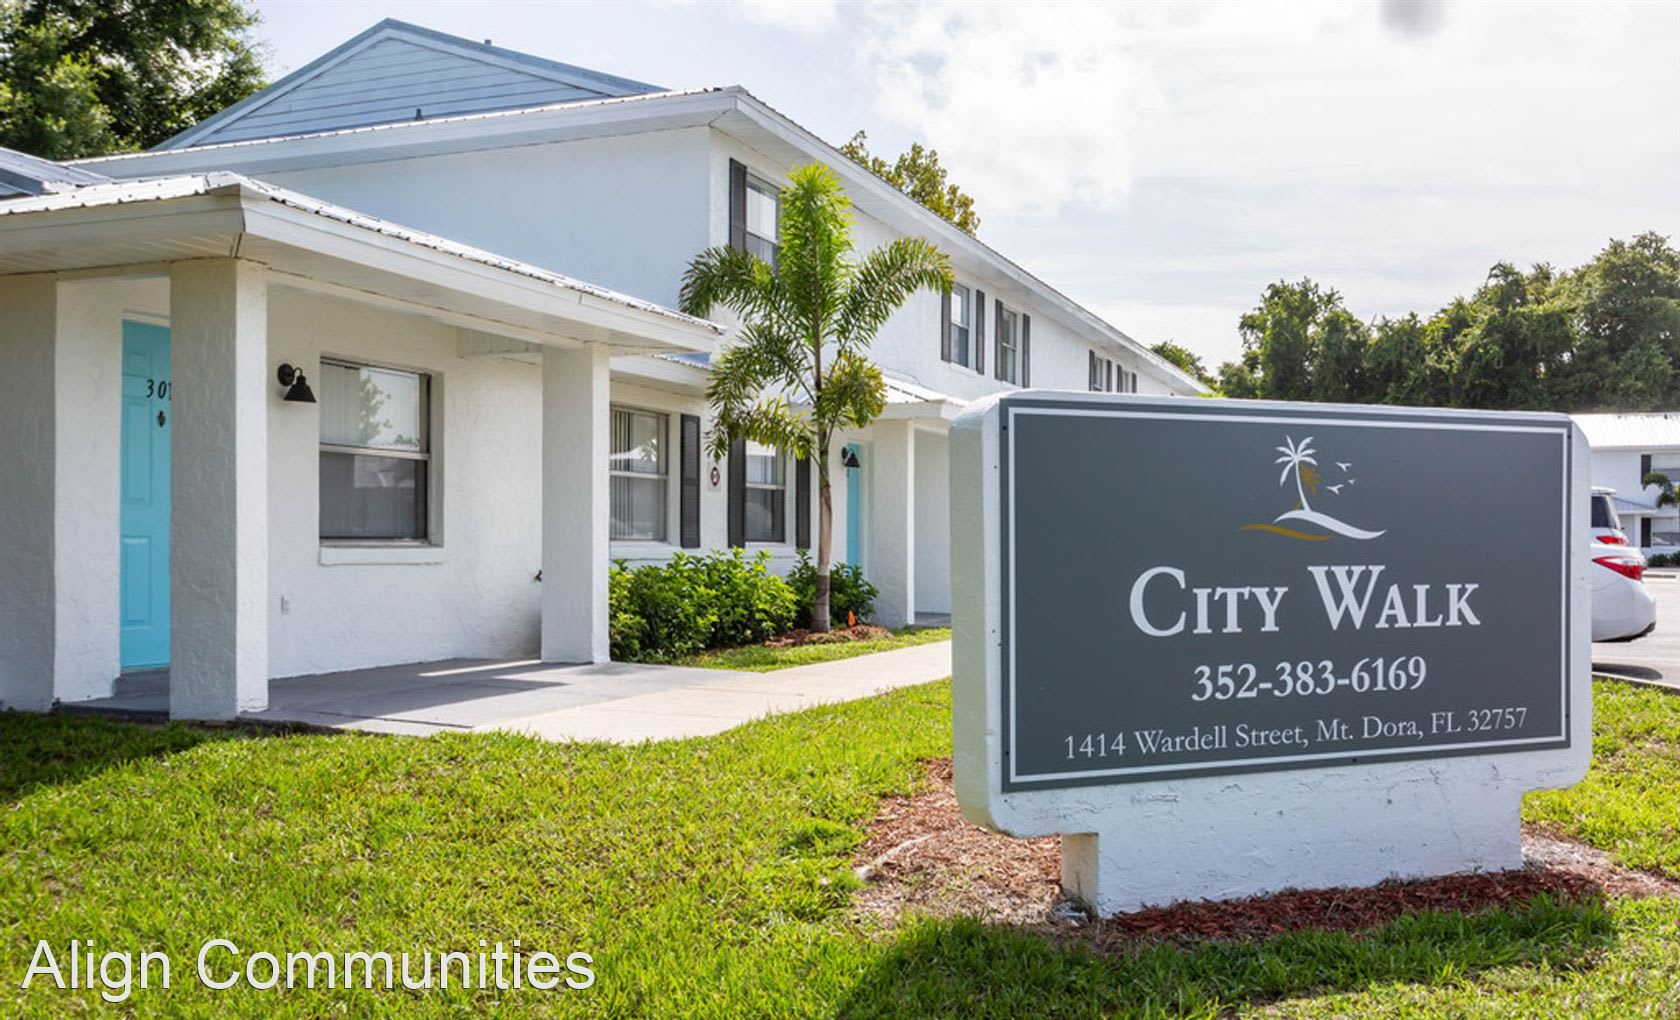 20 Best Apartments For Rent Under $1300 in Eustis, FL (with pics!) photo